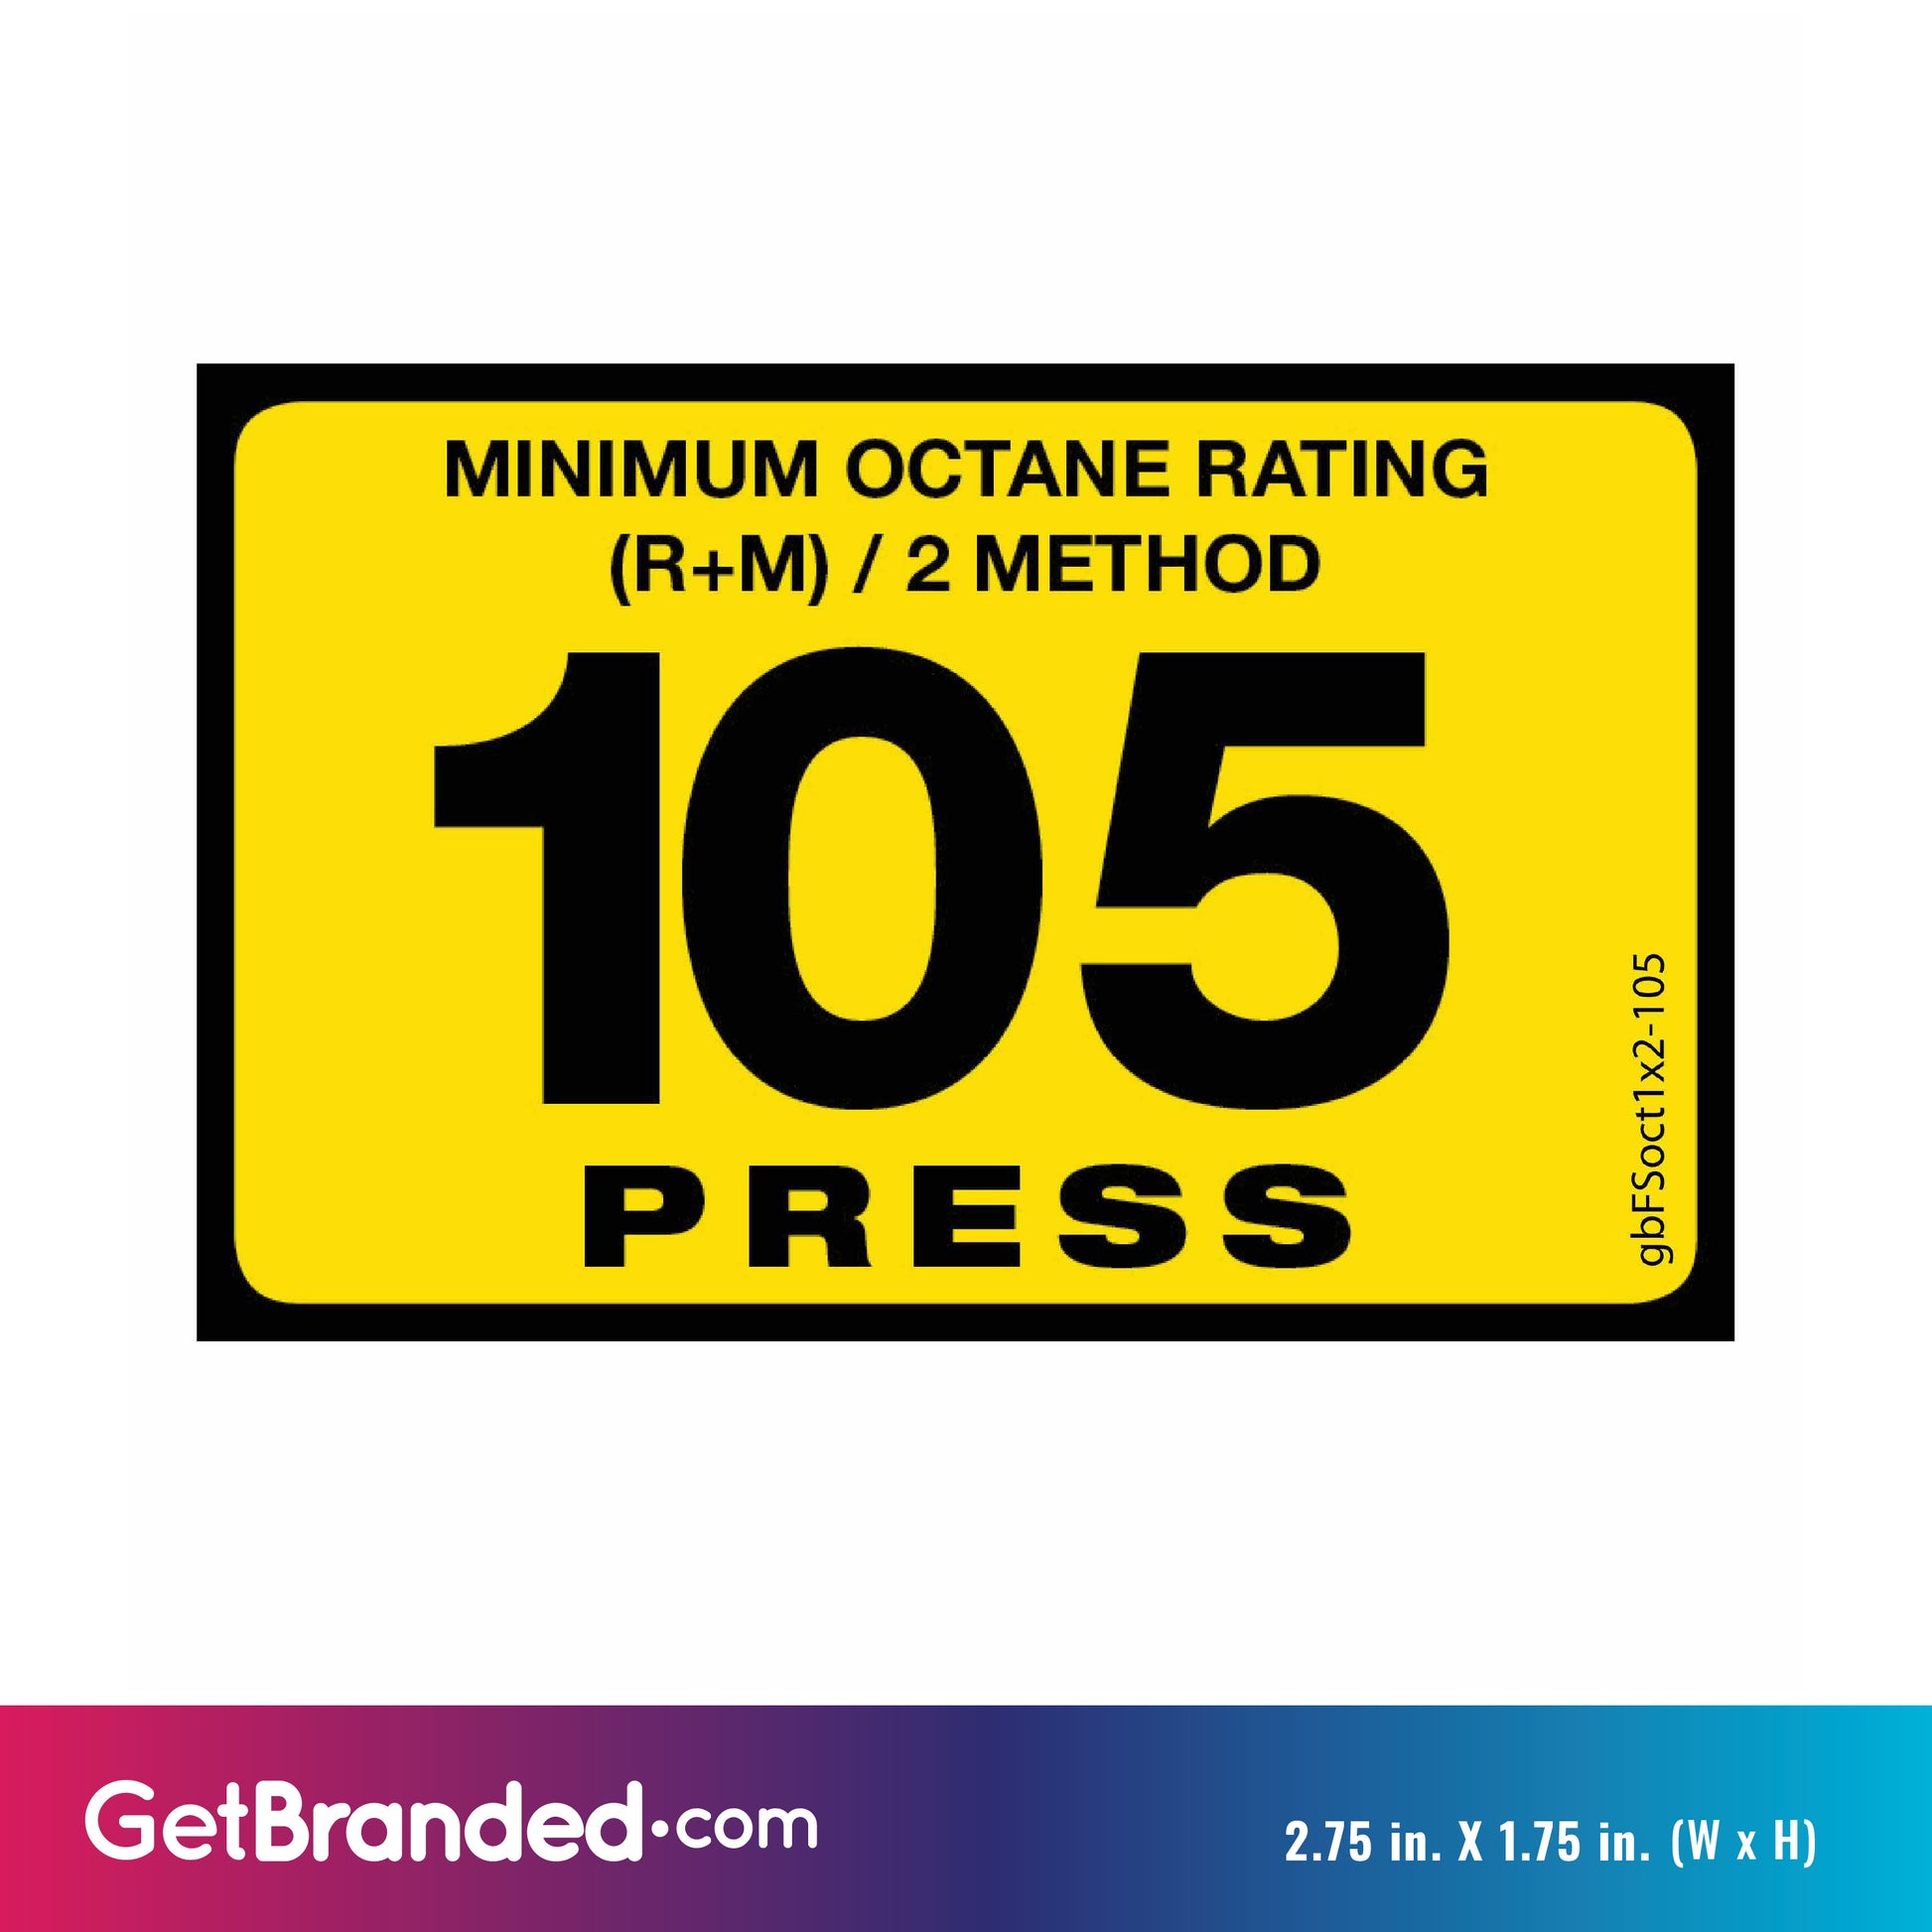 104 Press Octane Rating Decal. 1 inch by 2 inches size guide.